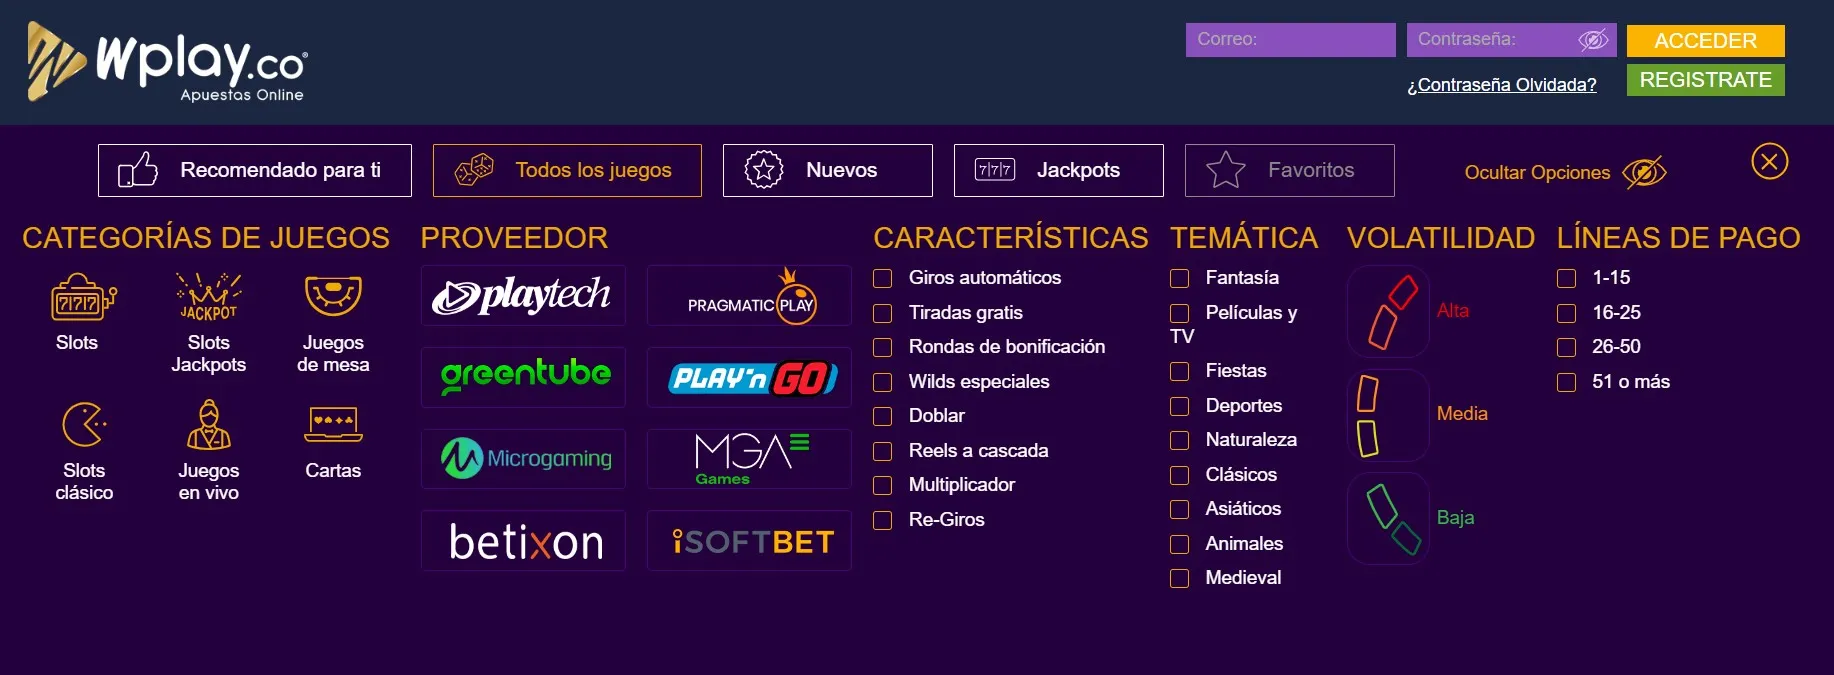 colombia mejores casinos WPlay